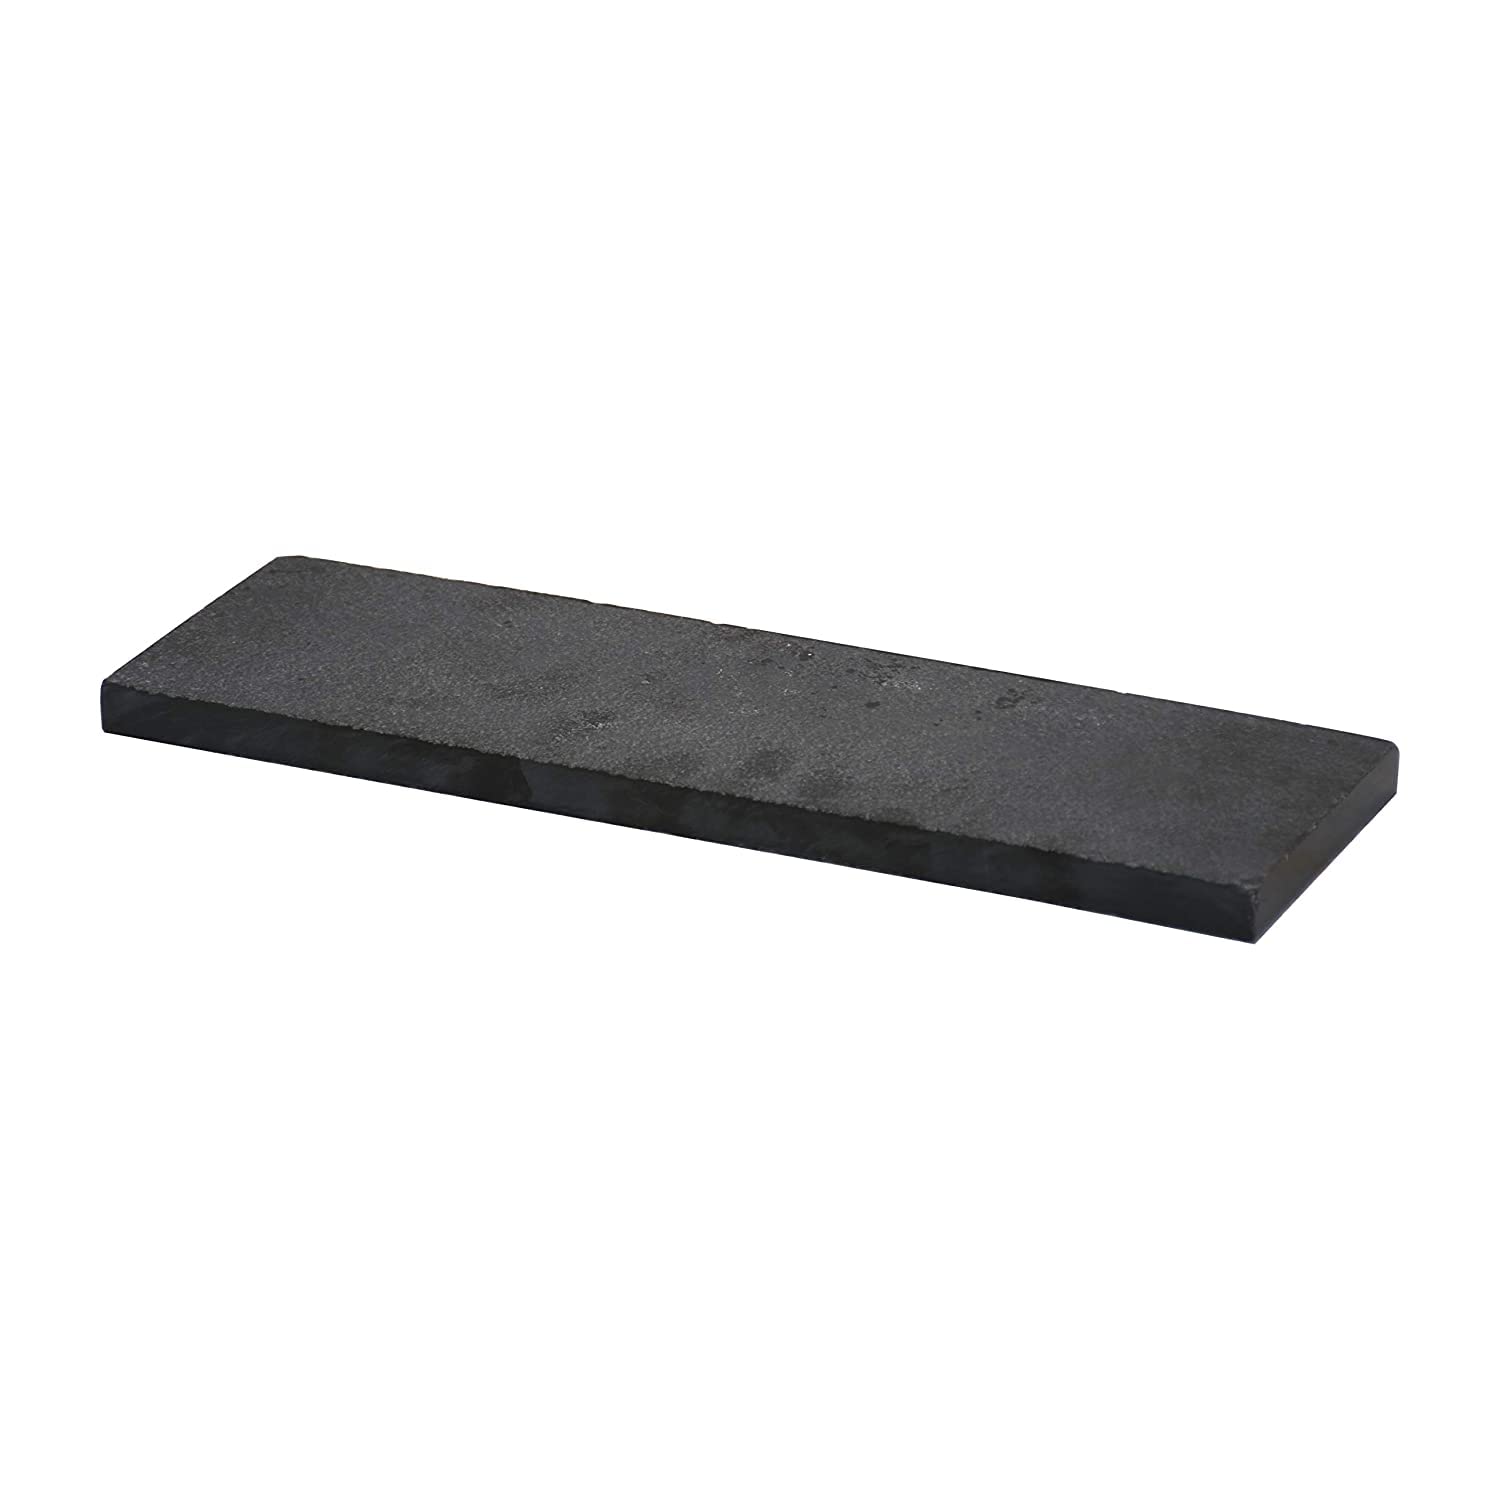 LABZIO Home - Stylish Serving Food Platter for Snacks/Elegant Cheese Board/Modern DIP Tray, Slate 14"X 4" Rectangle